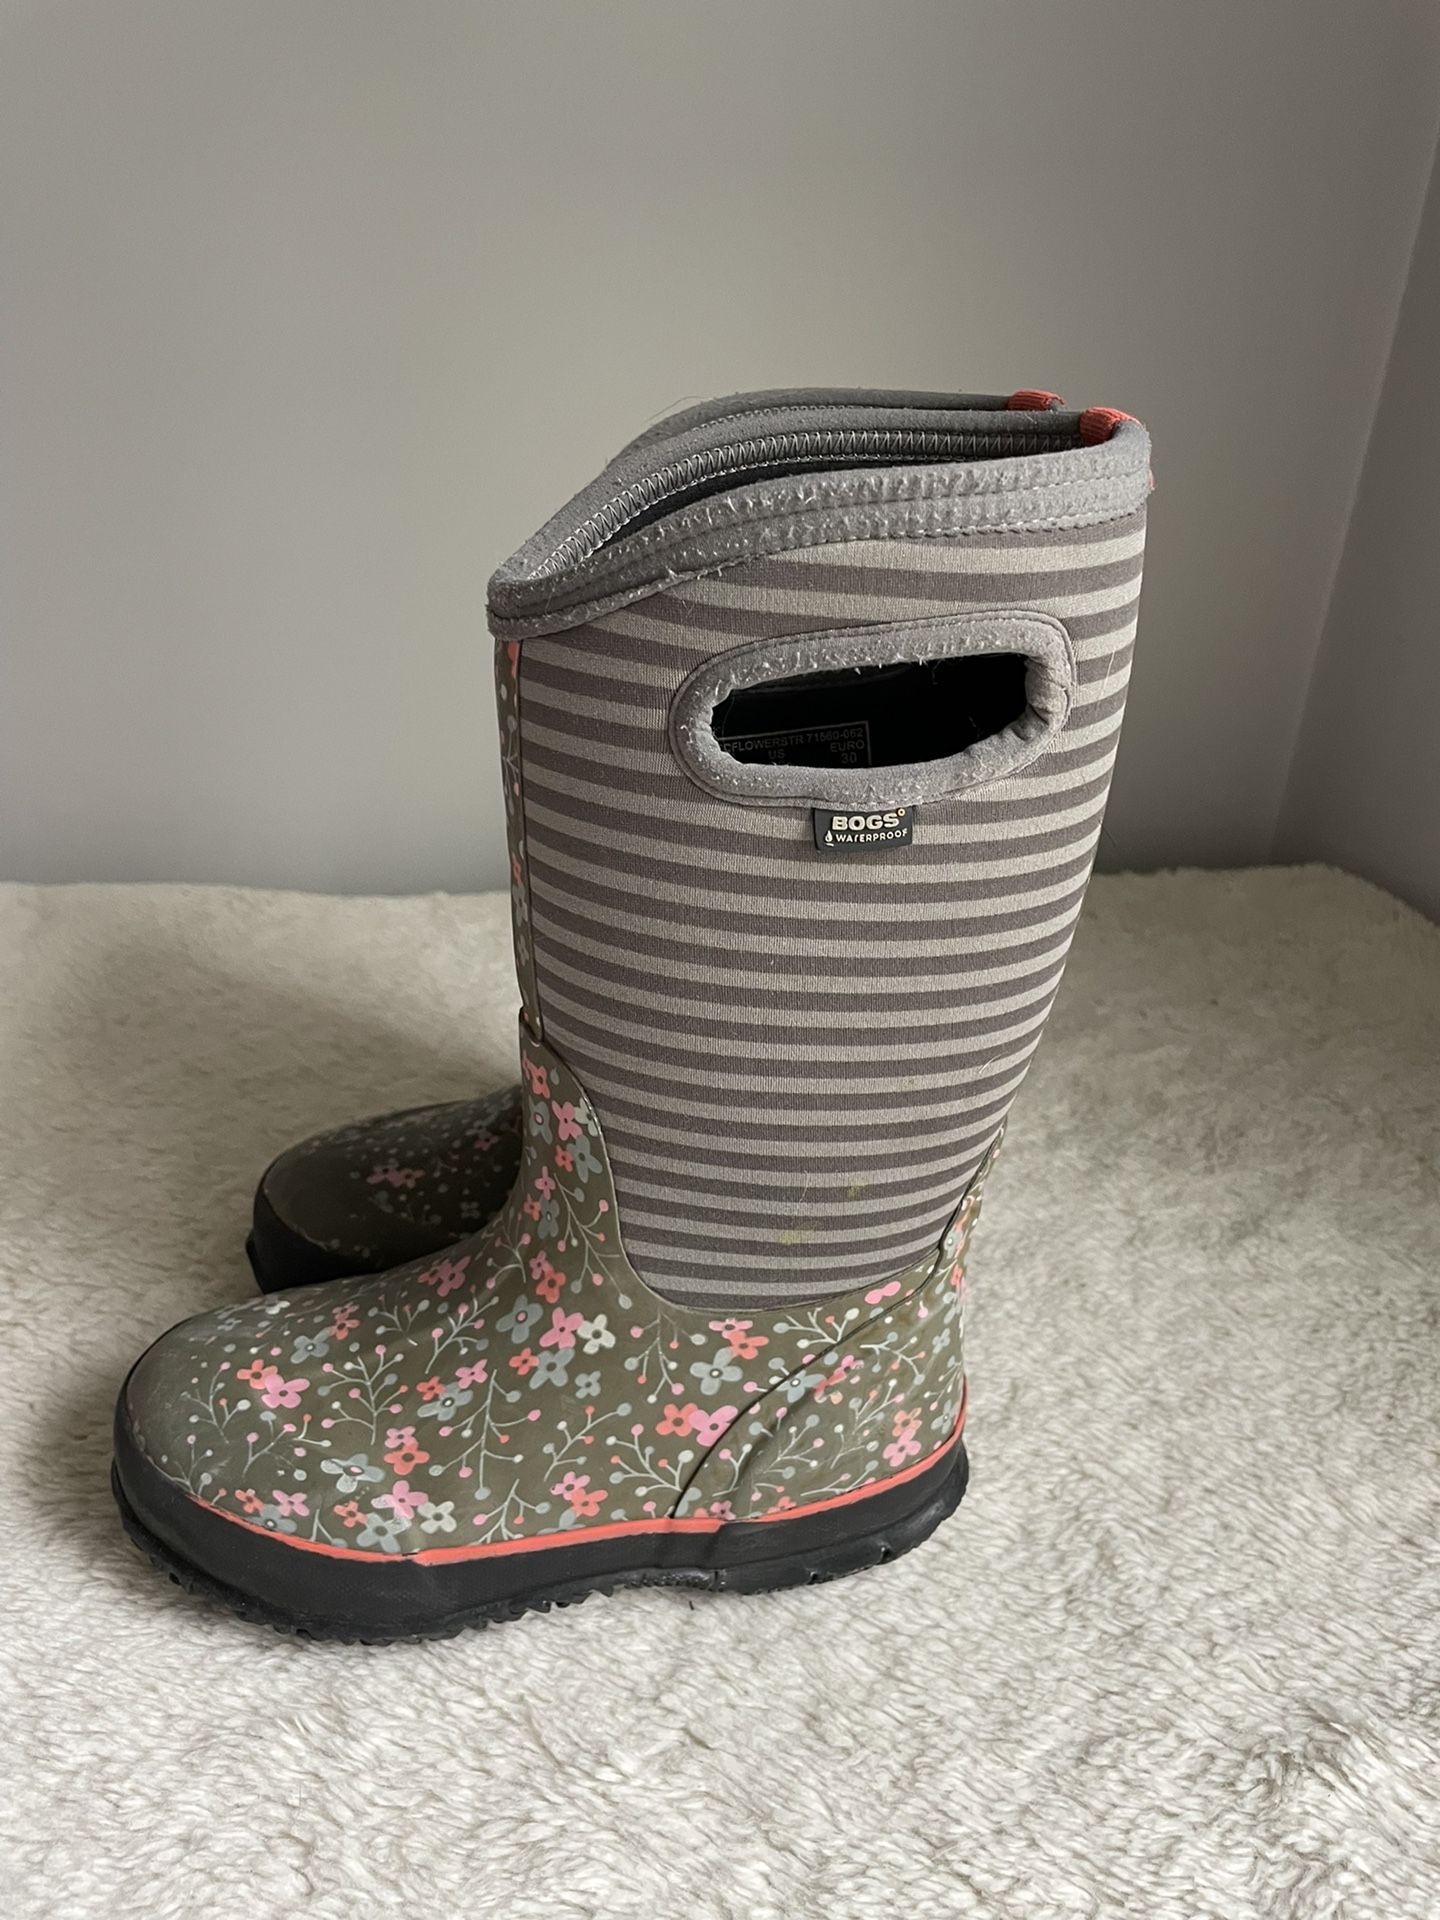 Bogs Girls Insulated Boots Size 13 Little Kids Snow Slush Rain Gray Pink Floral 